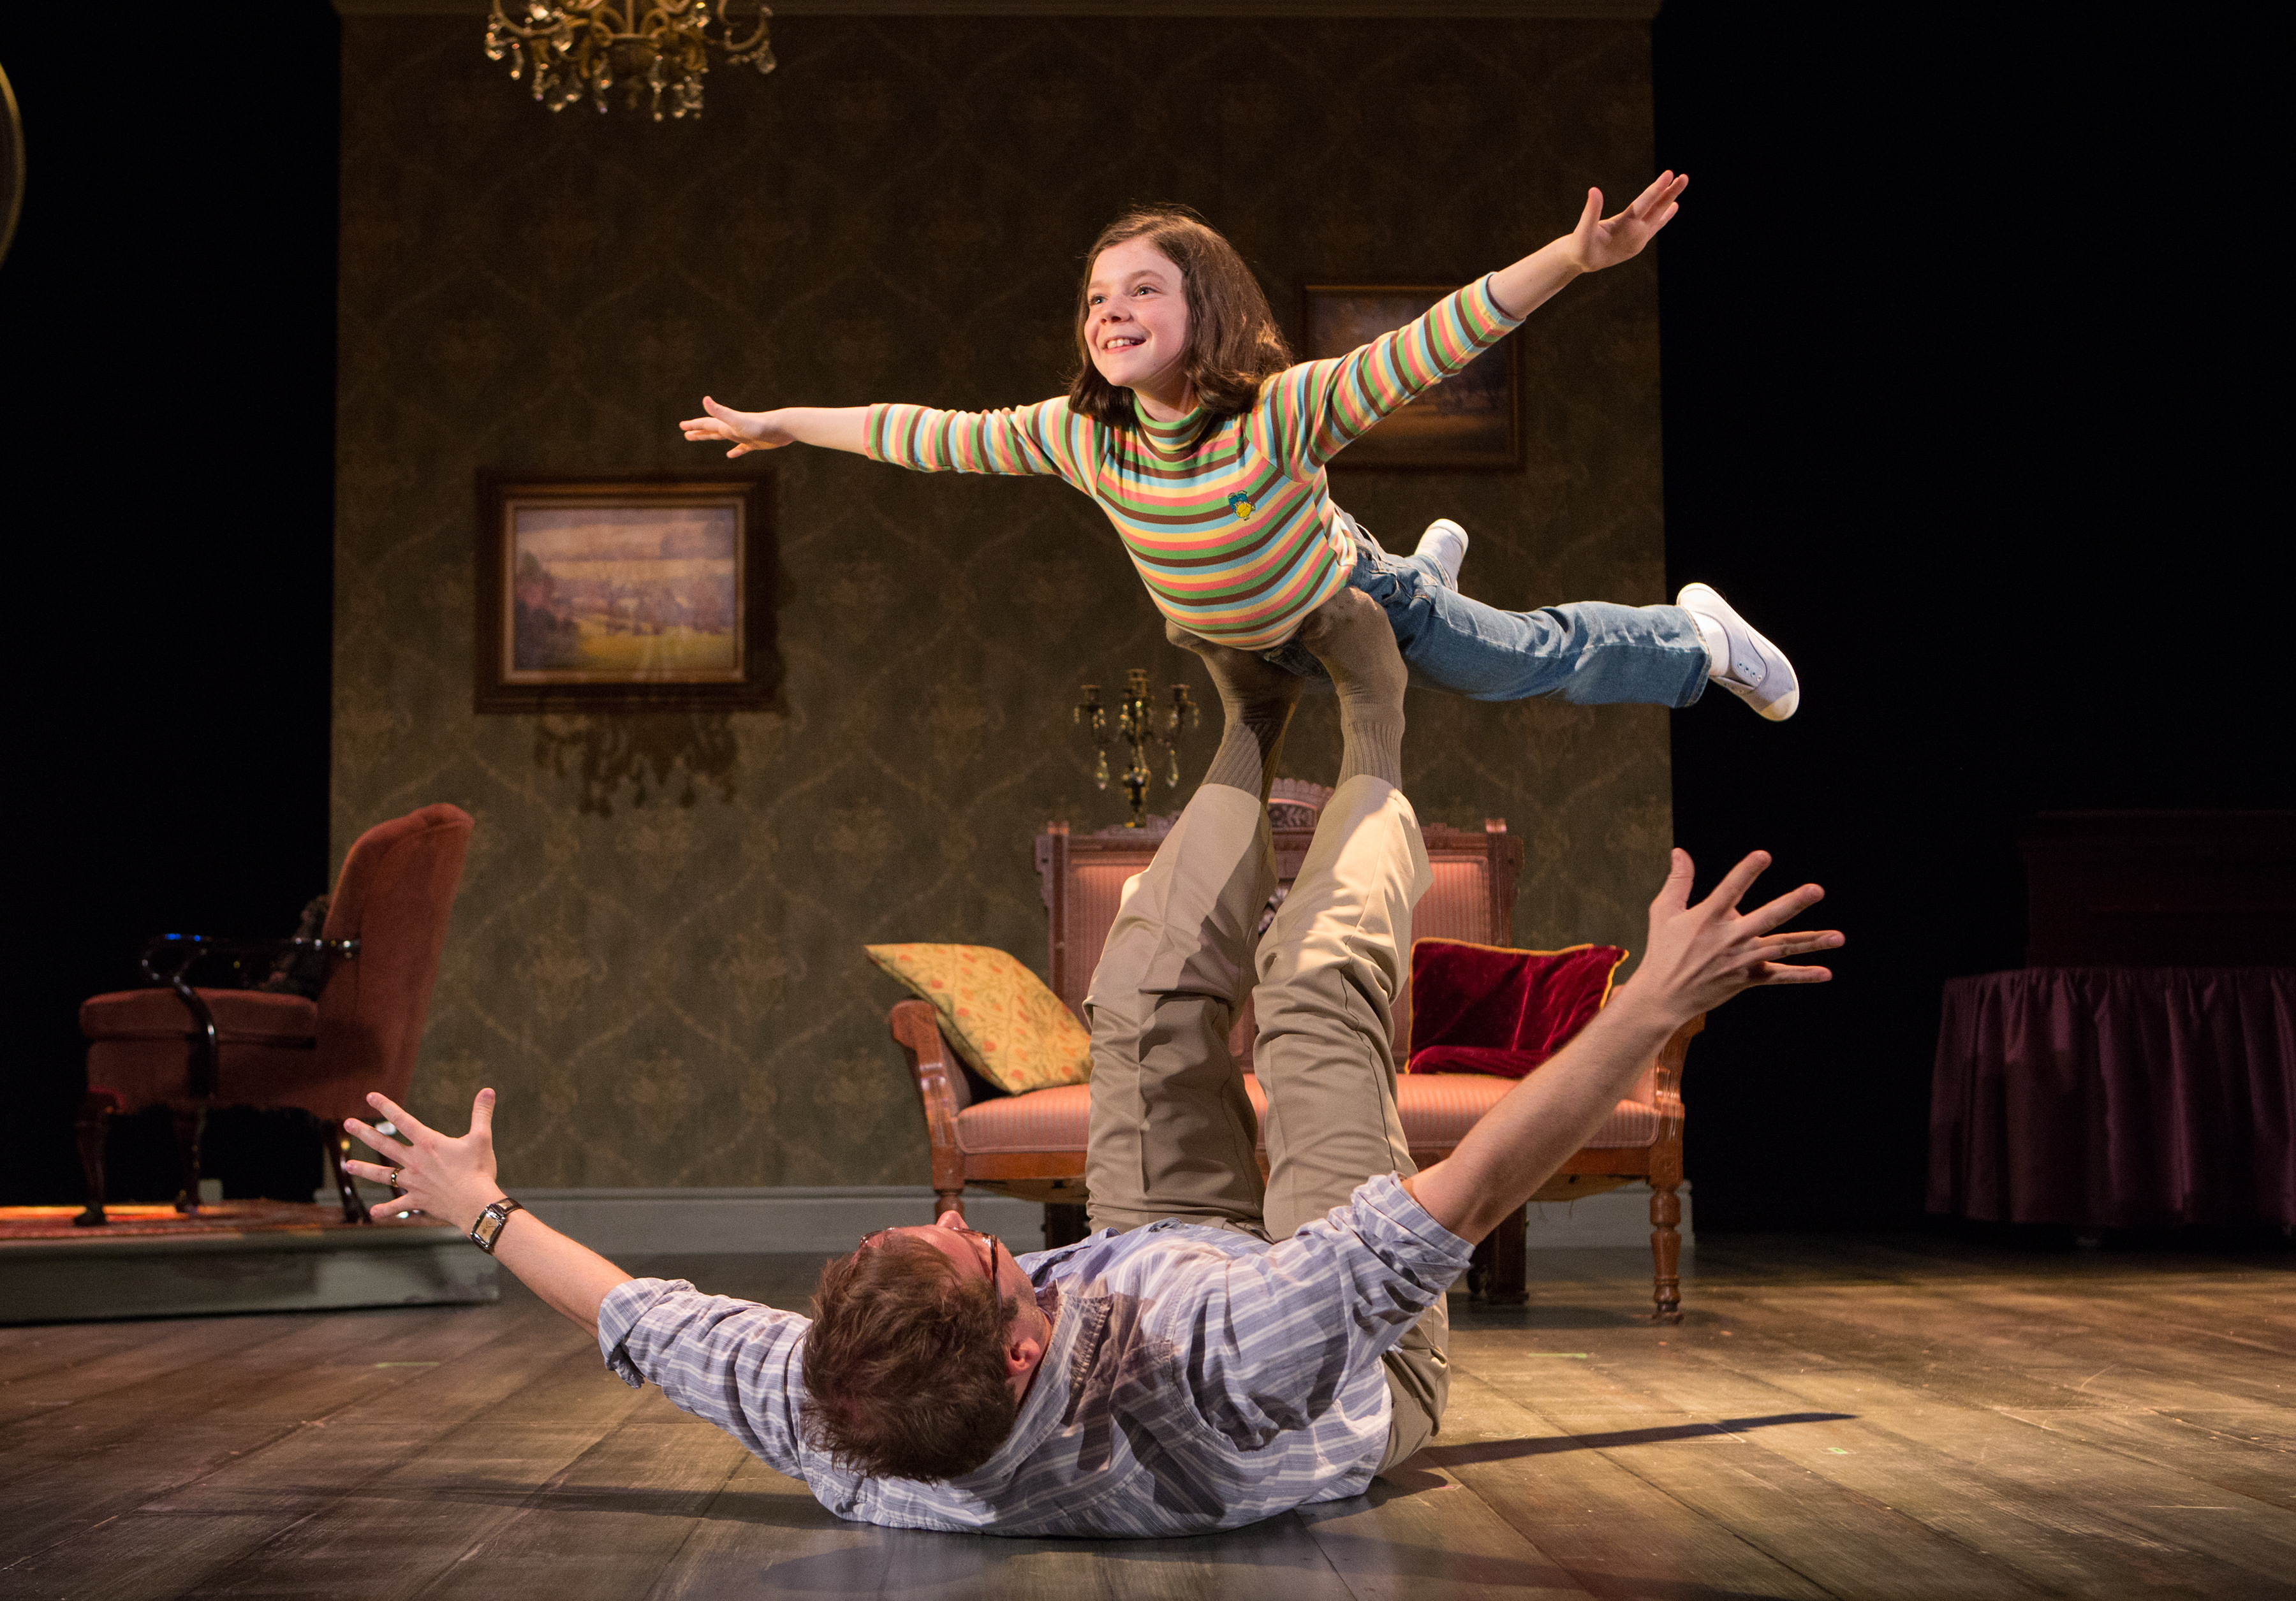 PAST EVENT: Fun Home – The Musical Stage Company, CAA Theatre (Toronto, ON), April 13 – May 6, 2018